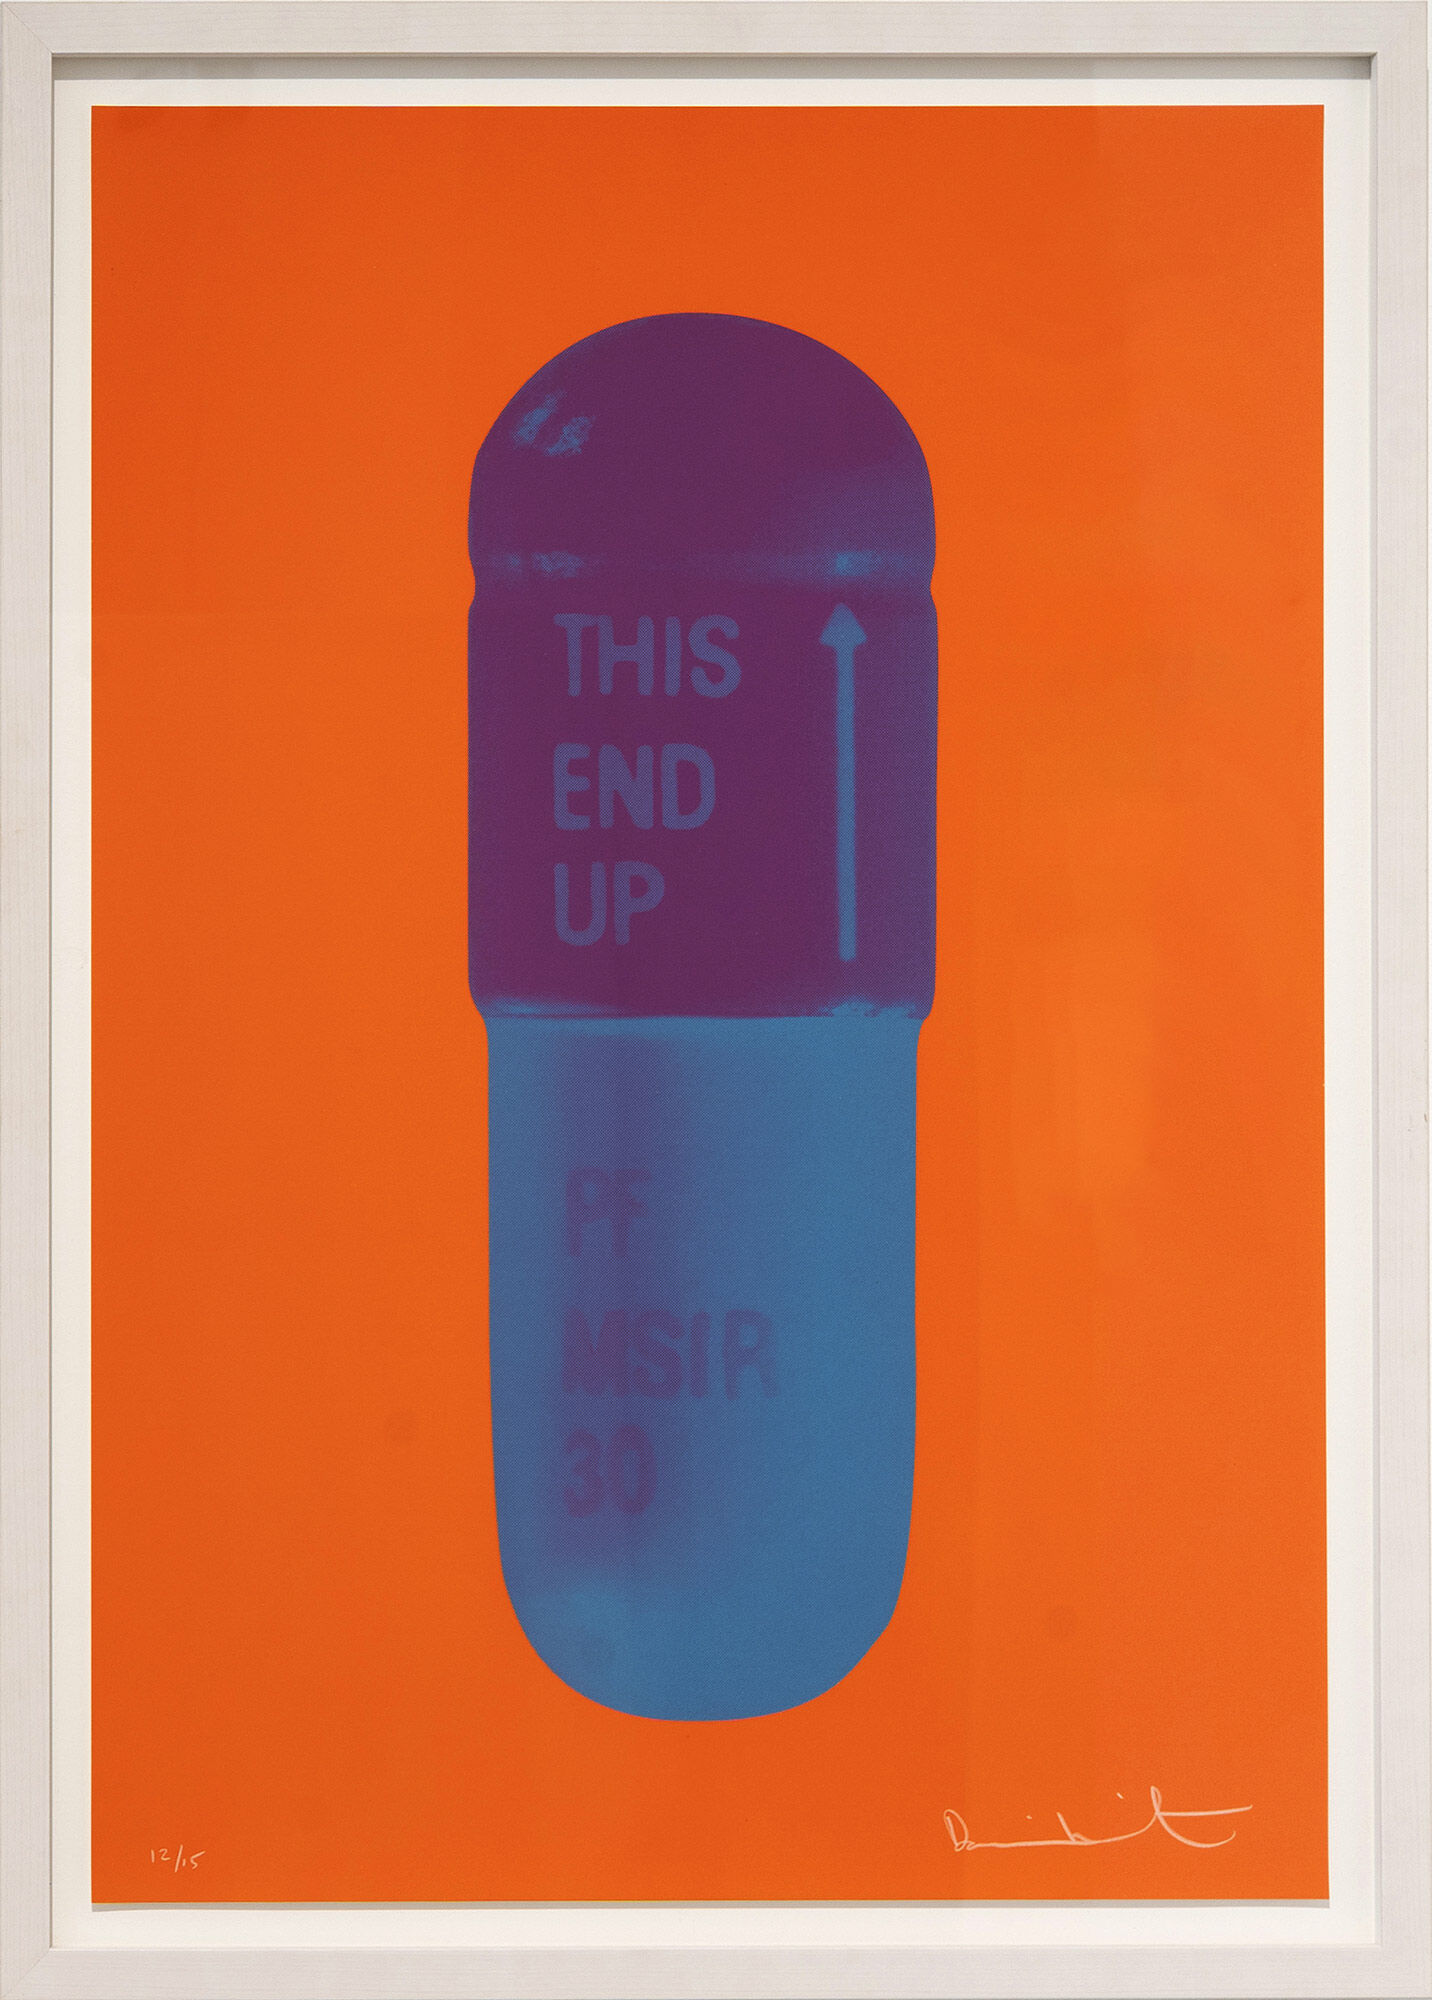 Picture "The Cure - Bright Orange/Orchid/Ari Force Blue" (2014) by Damien Hirst